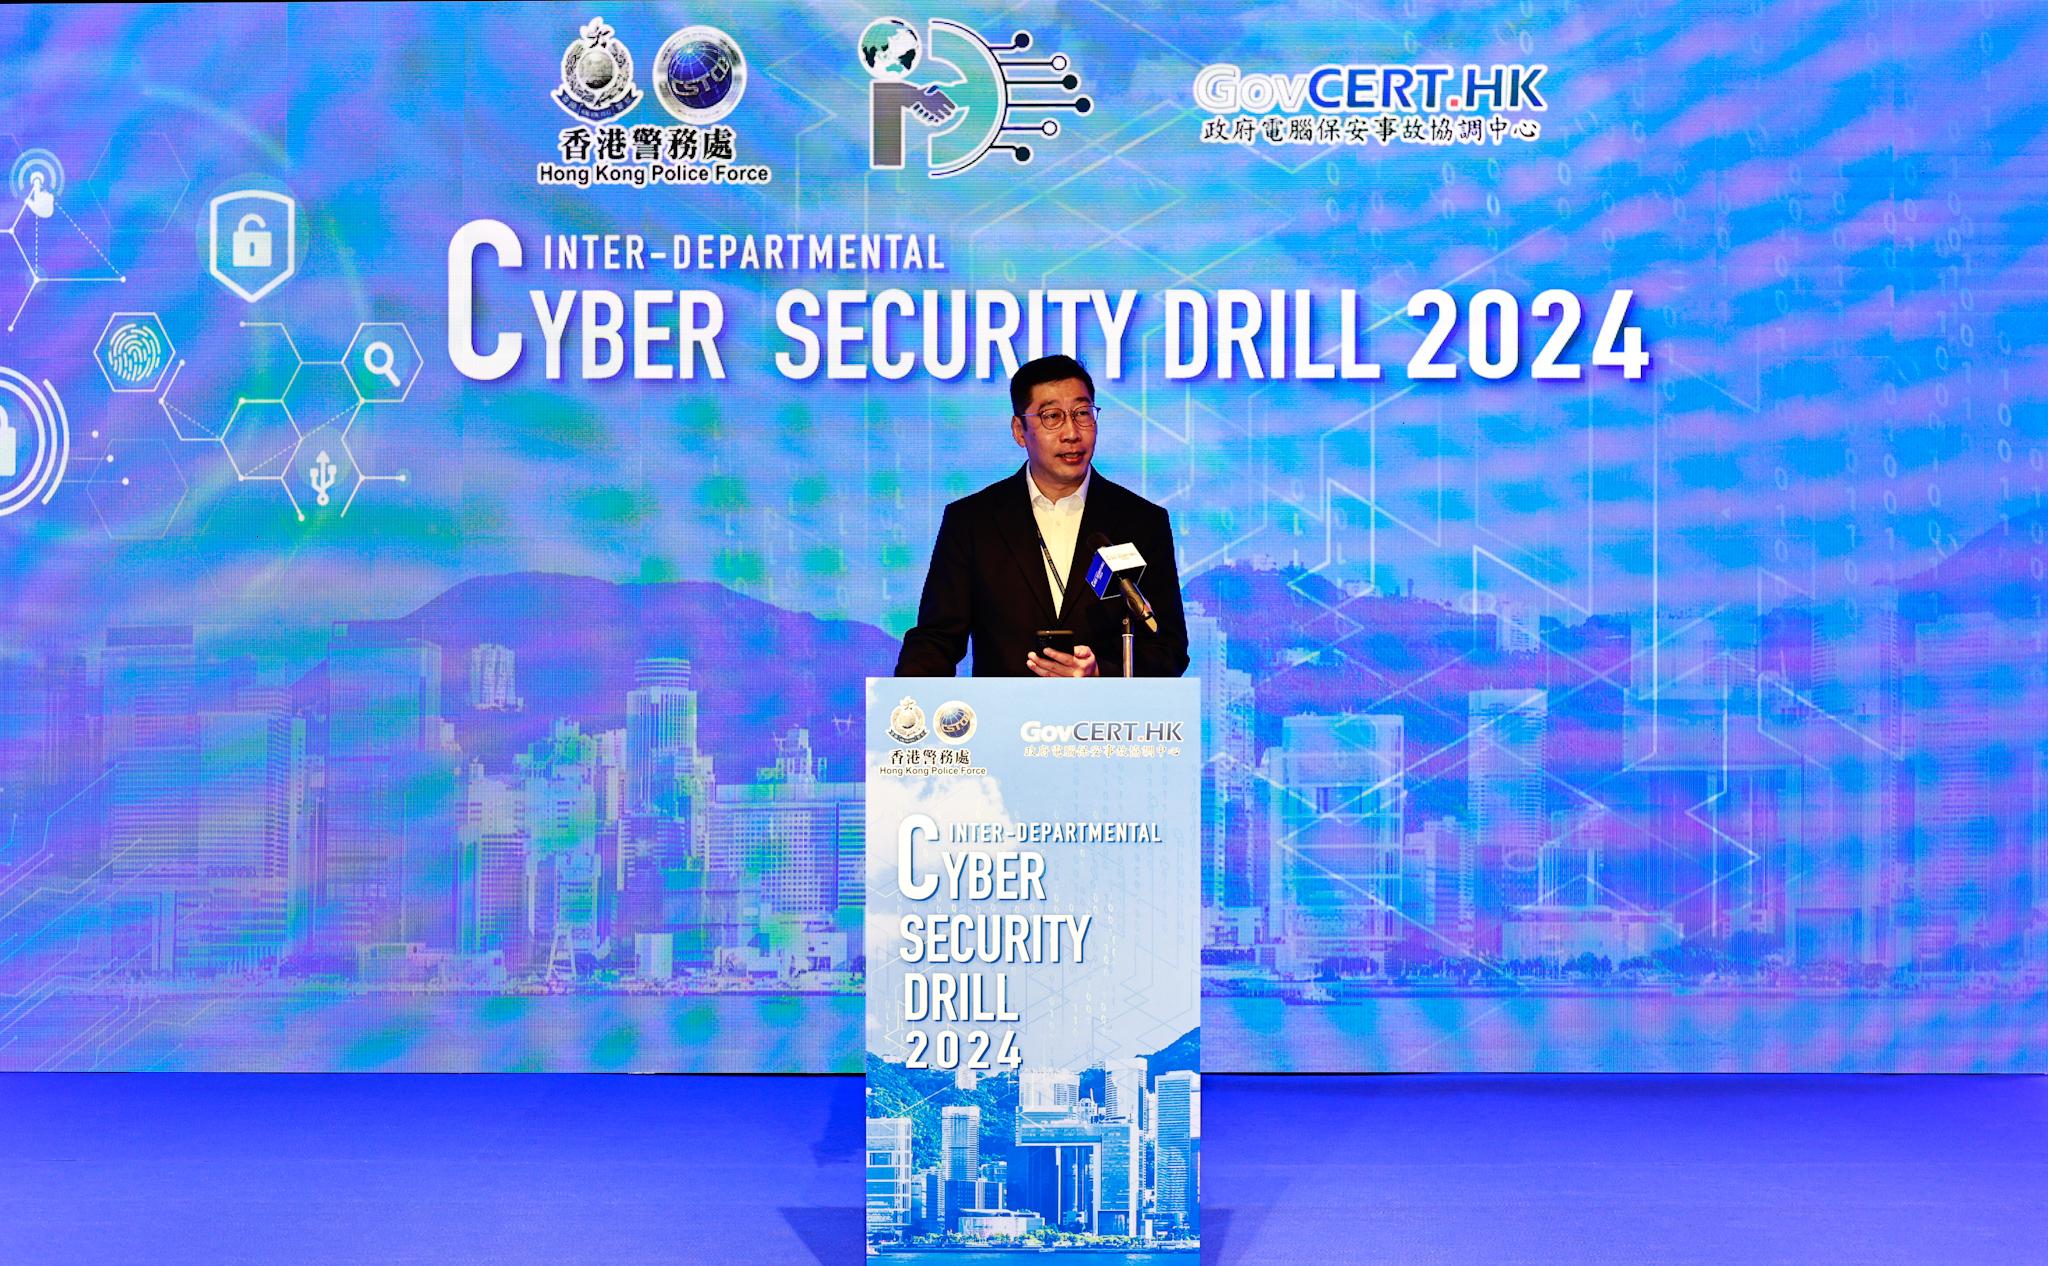 The Government Computer Emergency Response Team Hong Kong under the Office of the Government Chief Information Officer and the Cyber Security and Technology Crime Bureau of the Hong Kong Police Force co-organised the 8th Inter-departmental Cyber Security Drill today (April 25). Photo shows the Assistant Government Chief Information Officer (Cyber Security and Digital Identity), Mr Daniel Cheung, delivering opening remarks.
